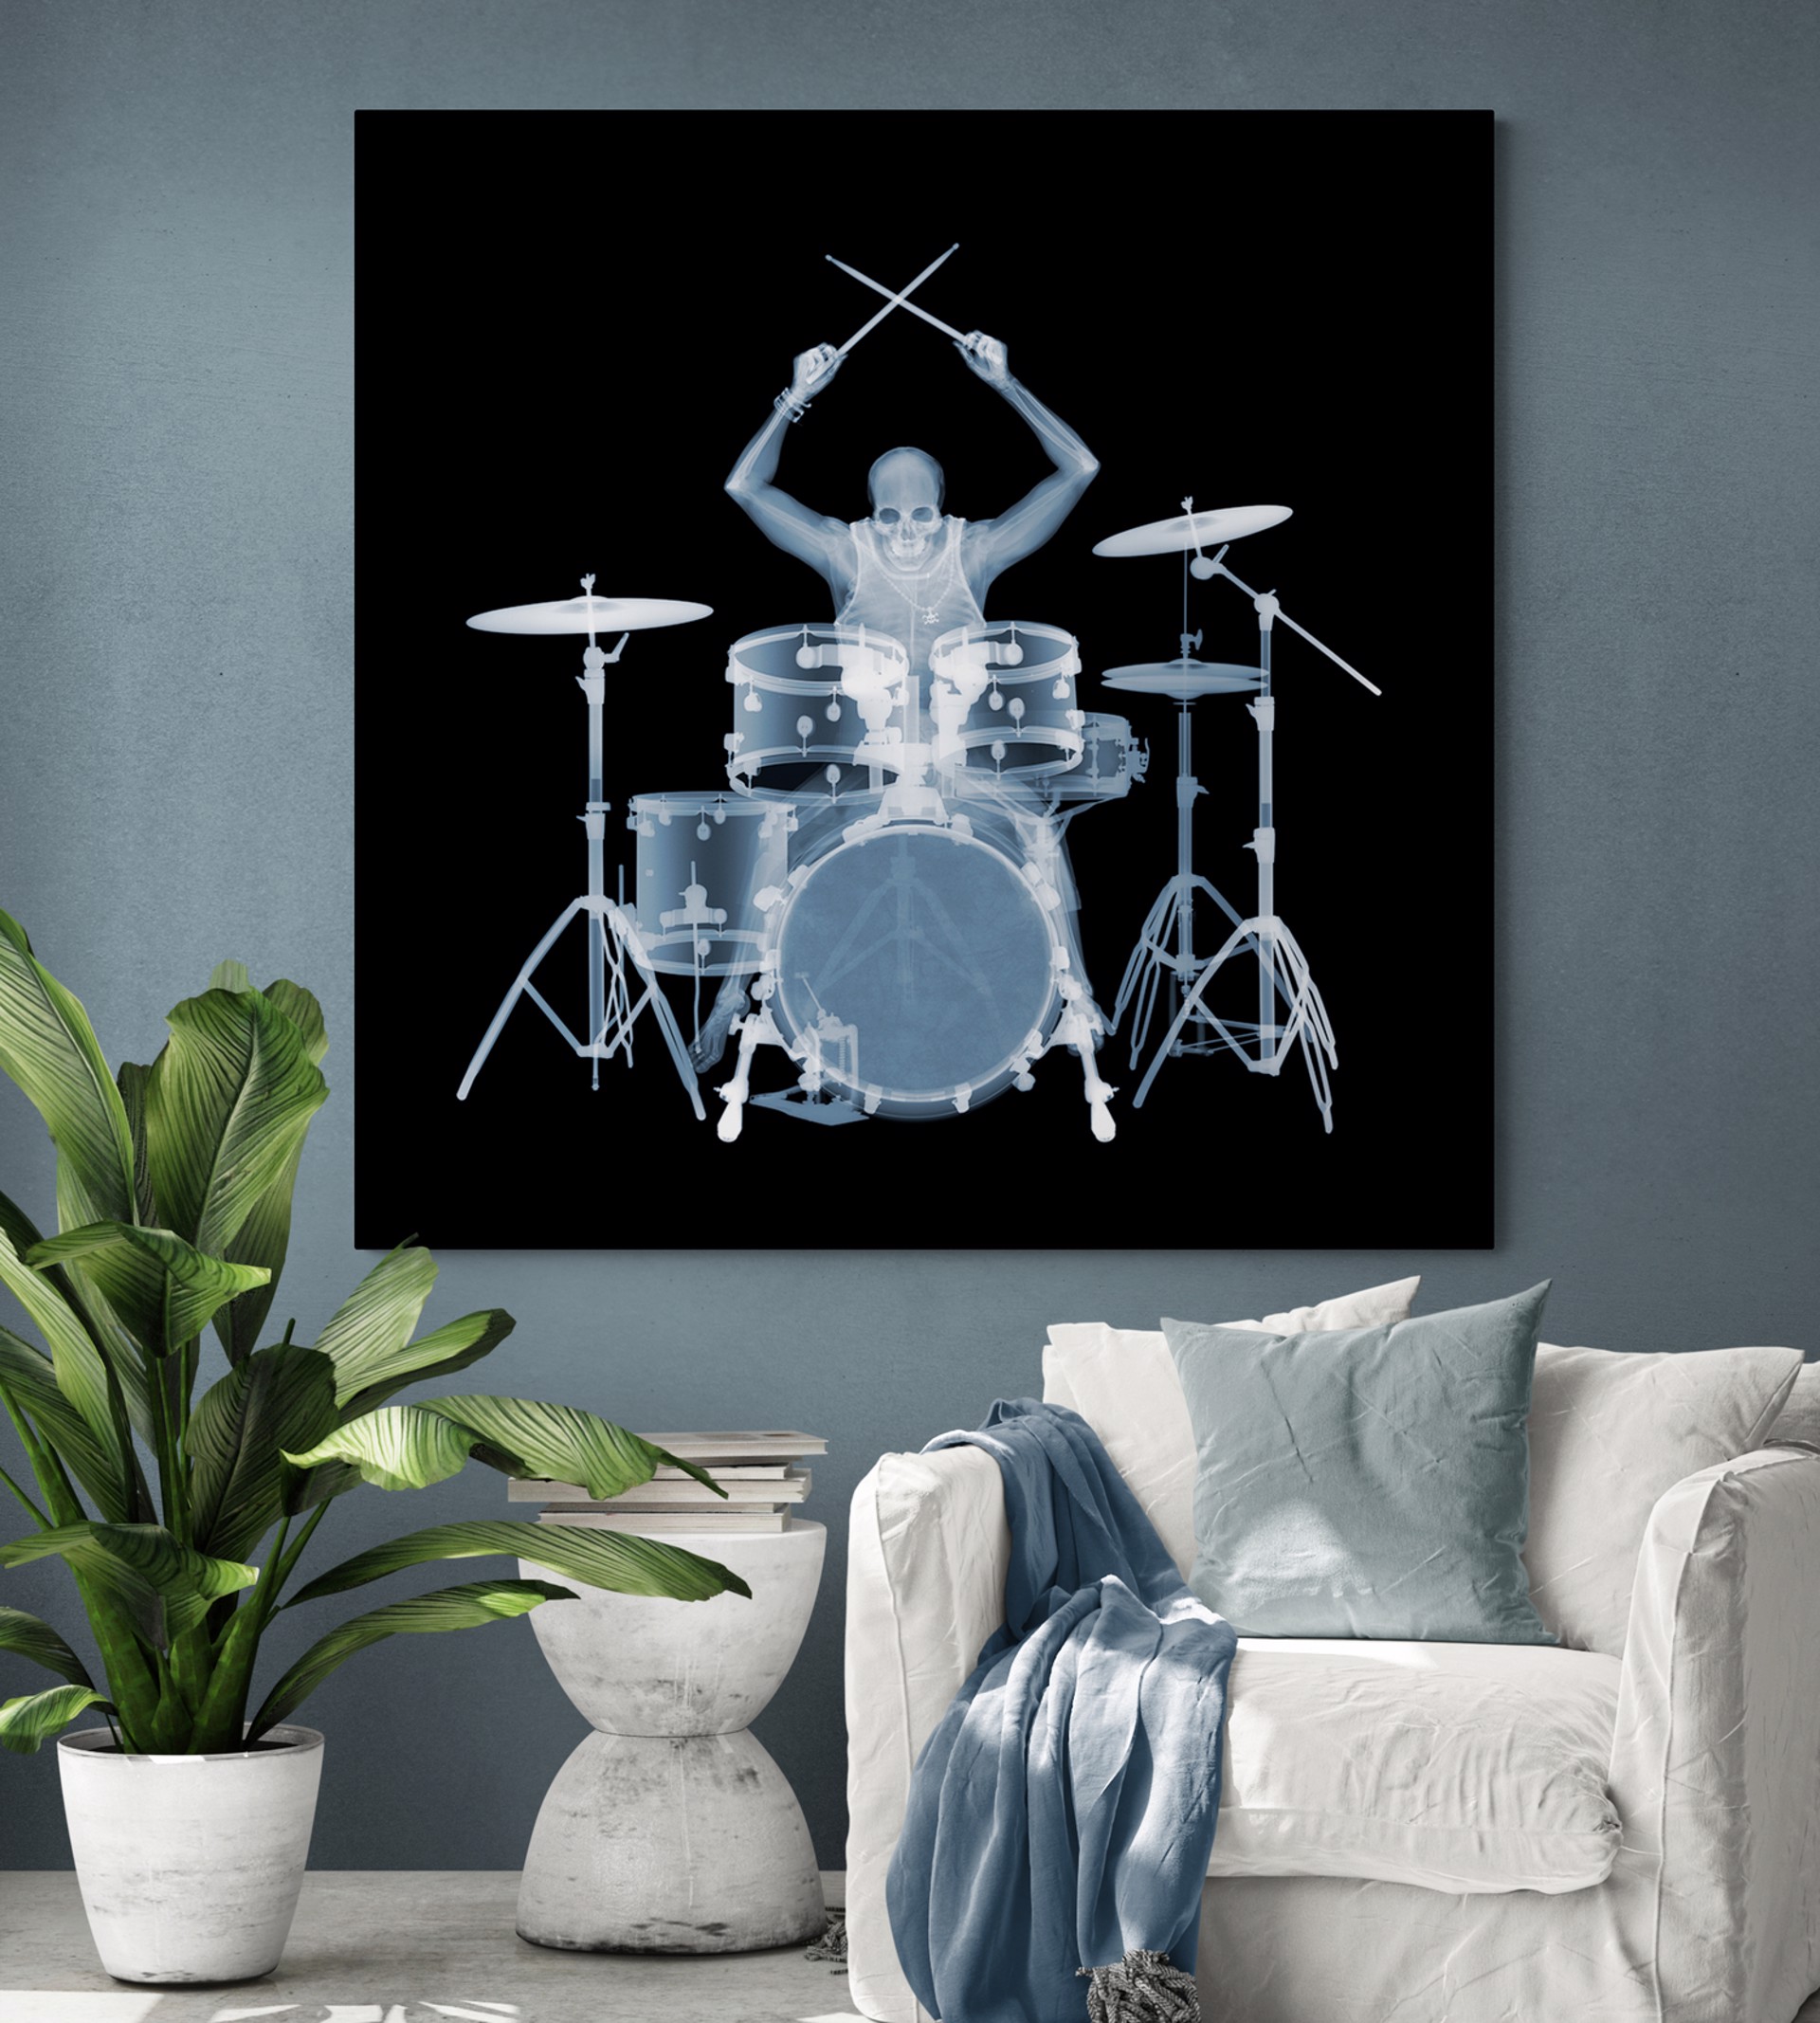 Drummin' by Nick Veasey